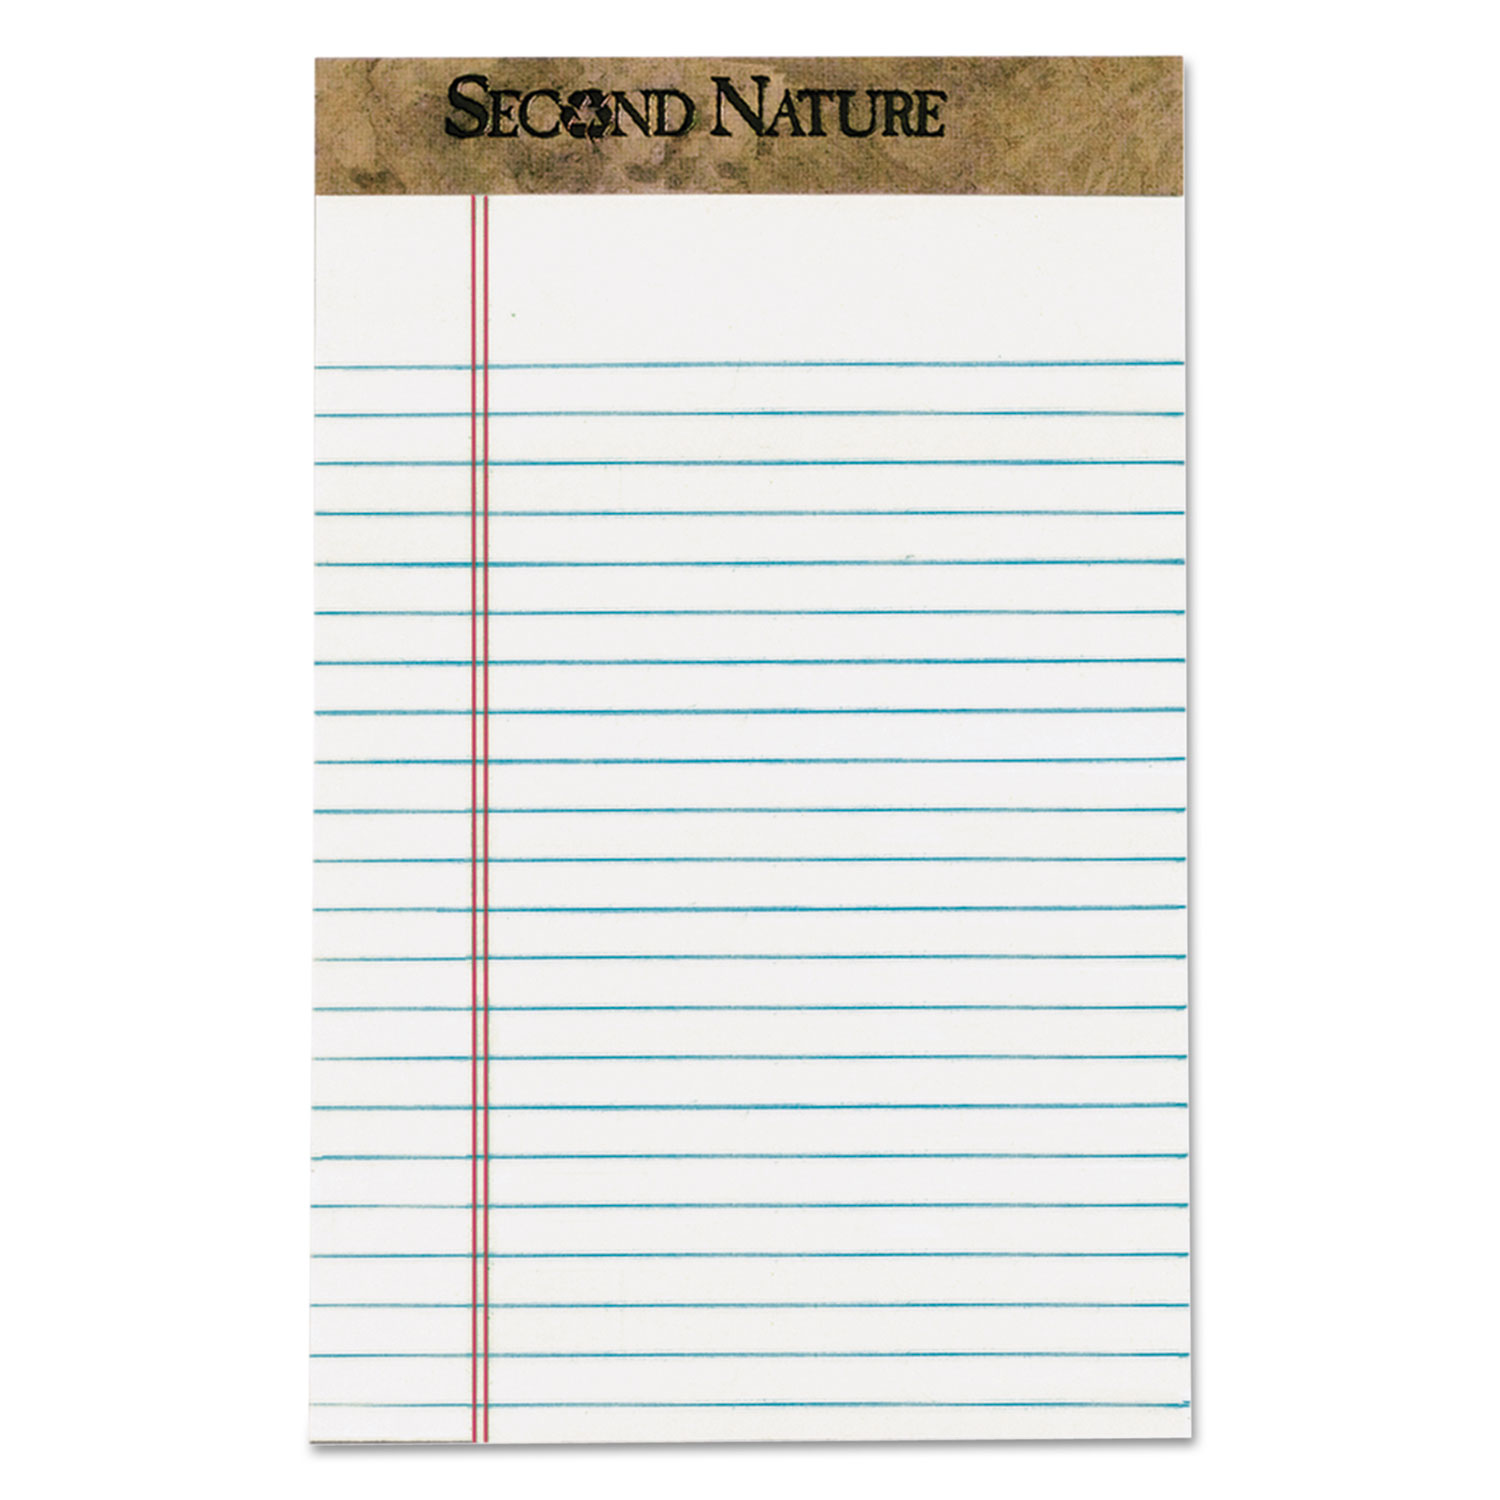  TOPS 74005 Second Nature Premium Recycled Pads, Narrow Rule, 5 x 8, White, 50 Sheets, Dozen (TOP74005) 